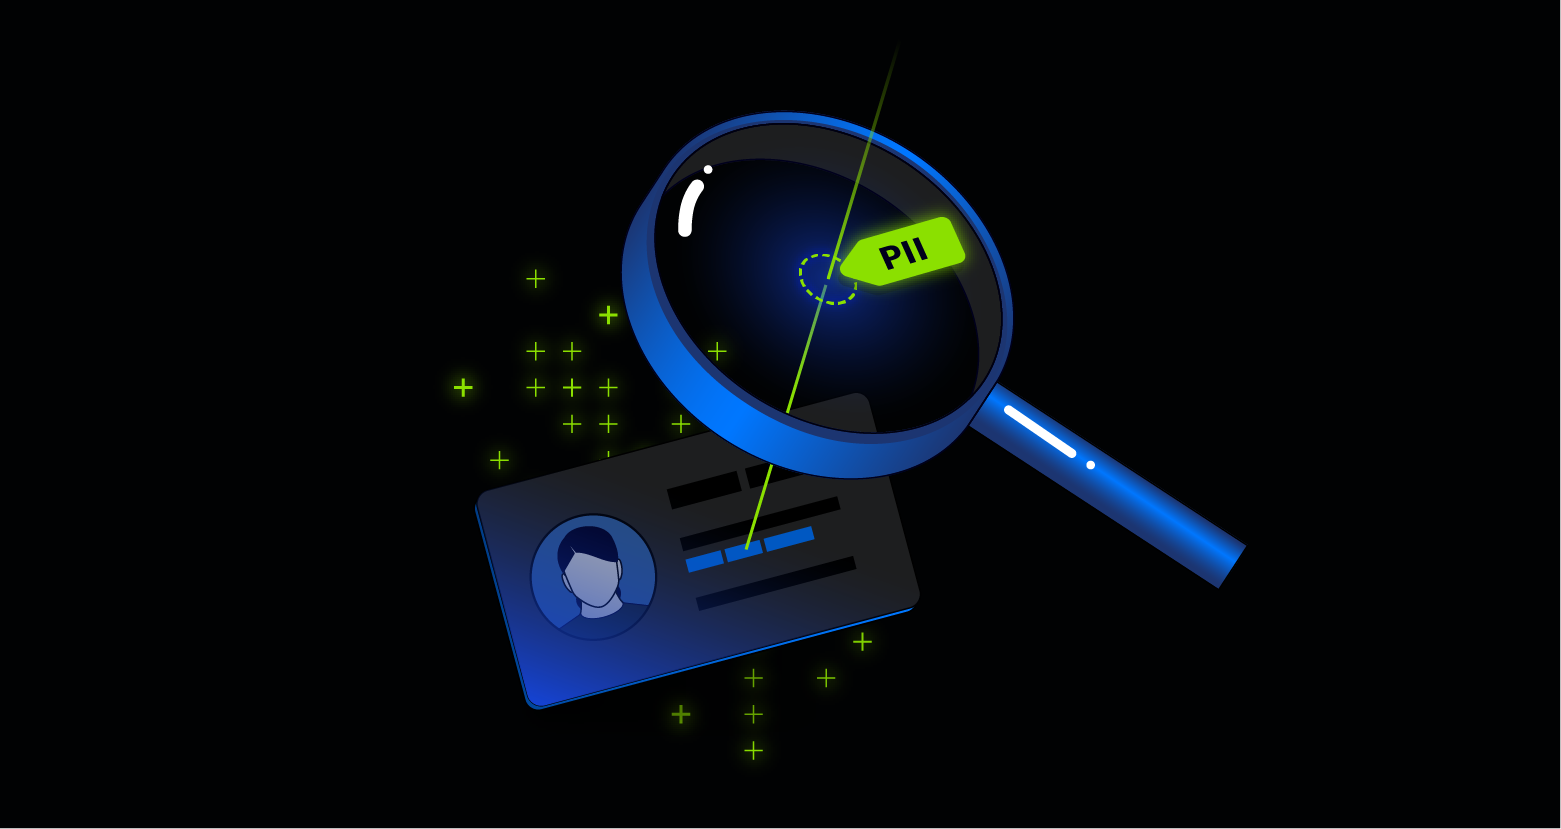 Magnify glass looks at sensitive information and reveals PHI data